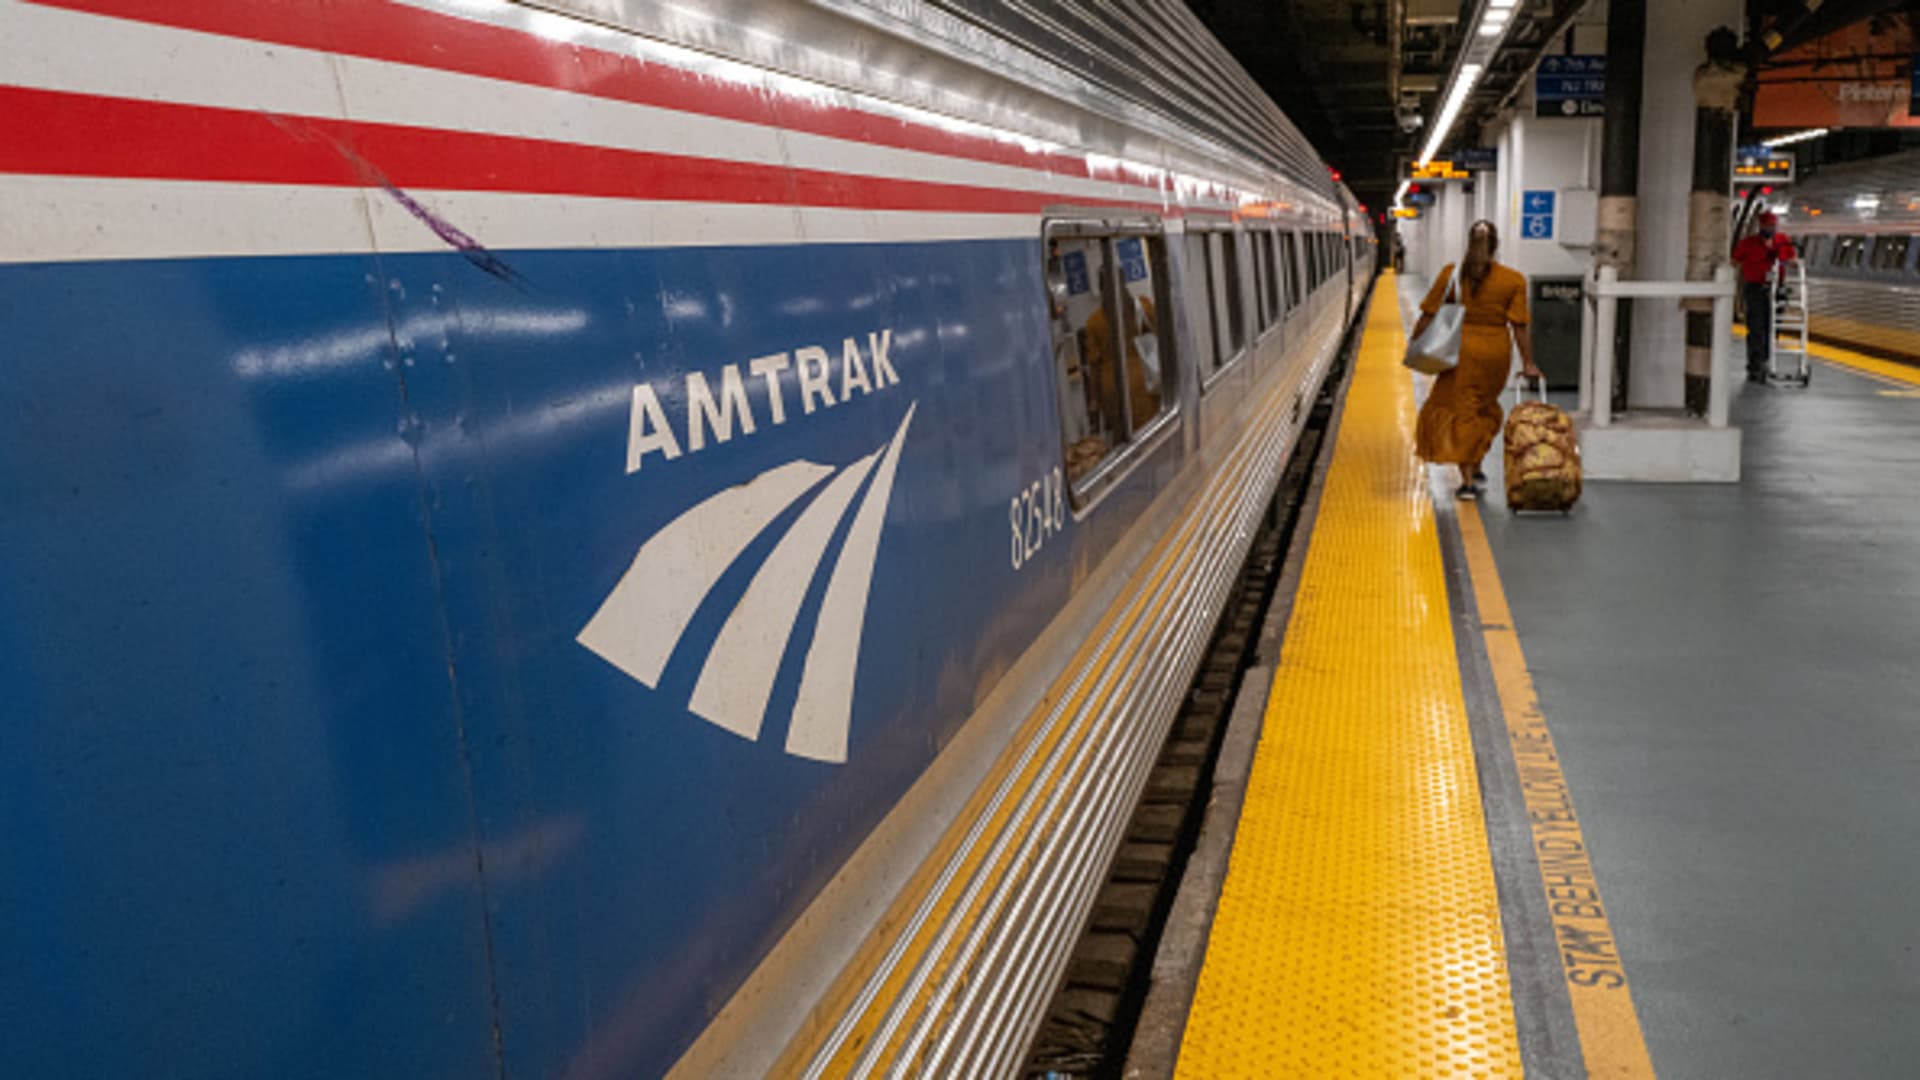 Amtrak announces ultra-cheap fares for late-night rides on popular routes